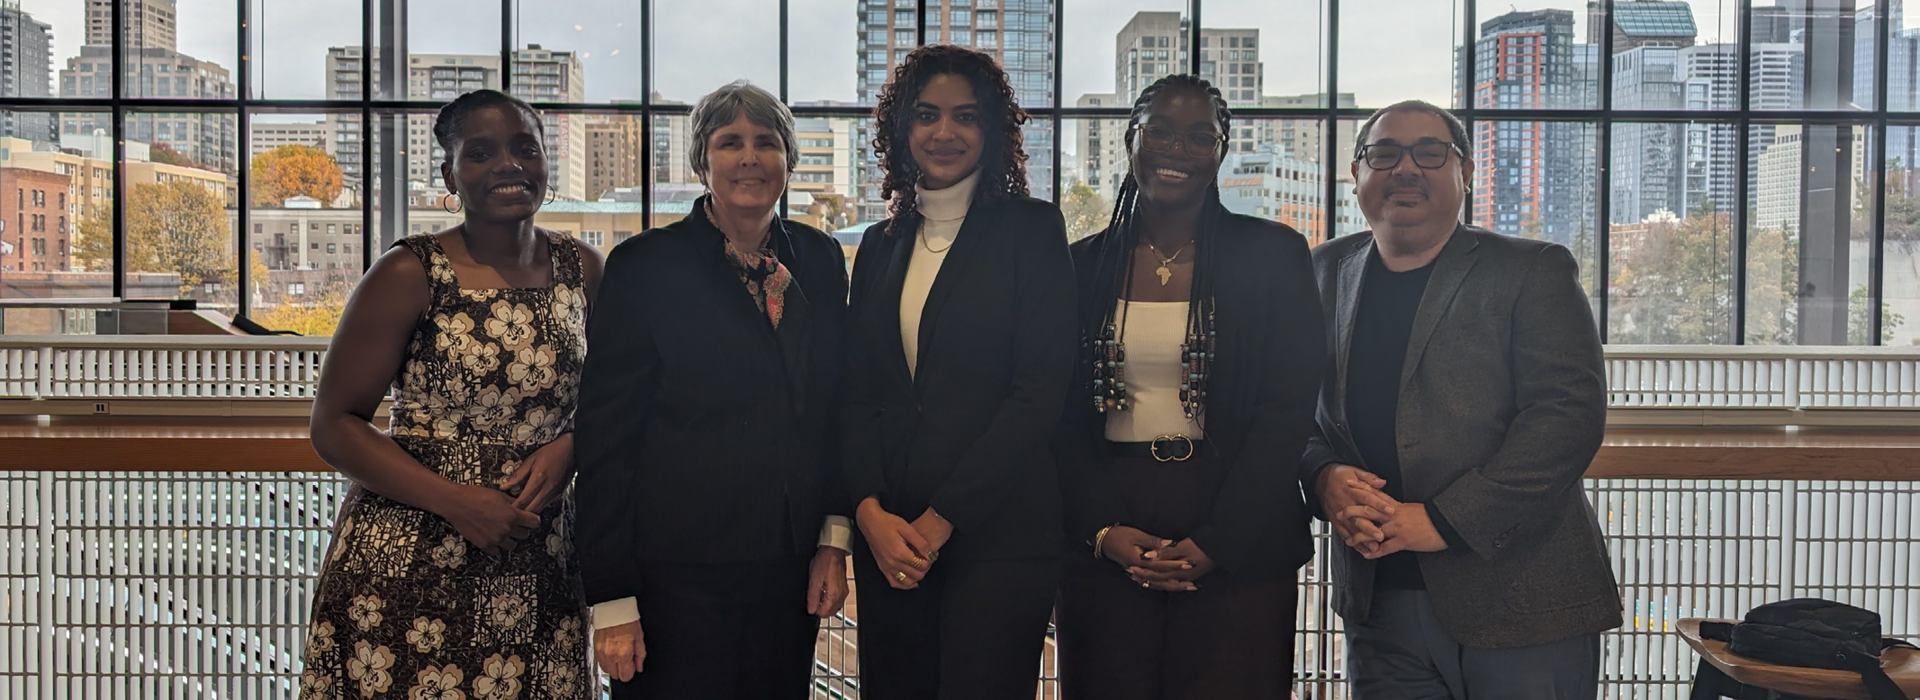  Jill Foster, MD, Assistant Dean for Pipeline and Pathway Programs, Medical Education Faculty Viviane Leuche, MD, and Eduardo Medina, MD, and BA/MD Scholars Maliah Jaiteh and Sophia Coleman